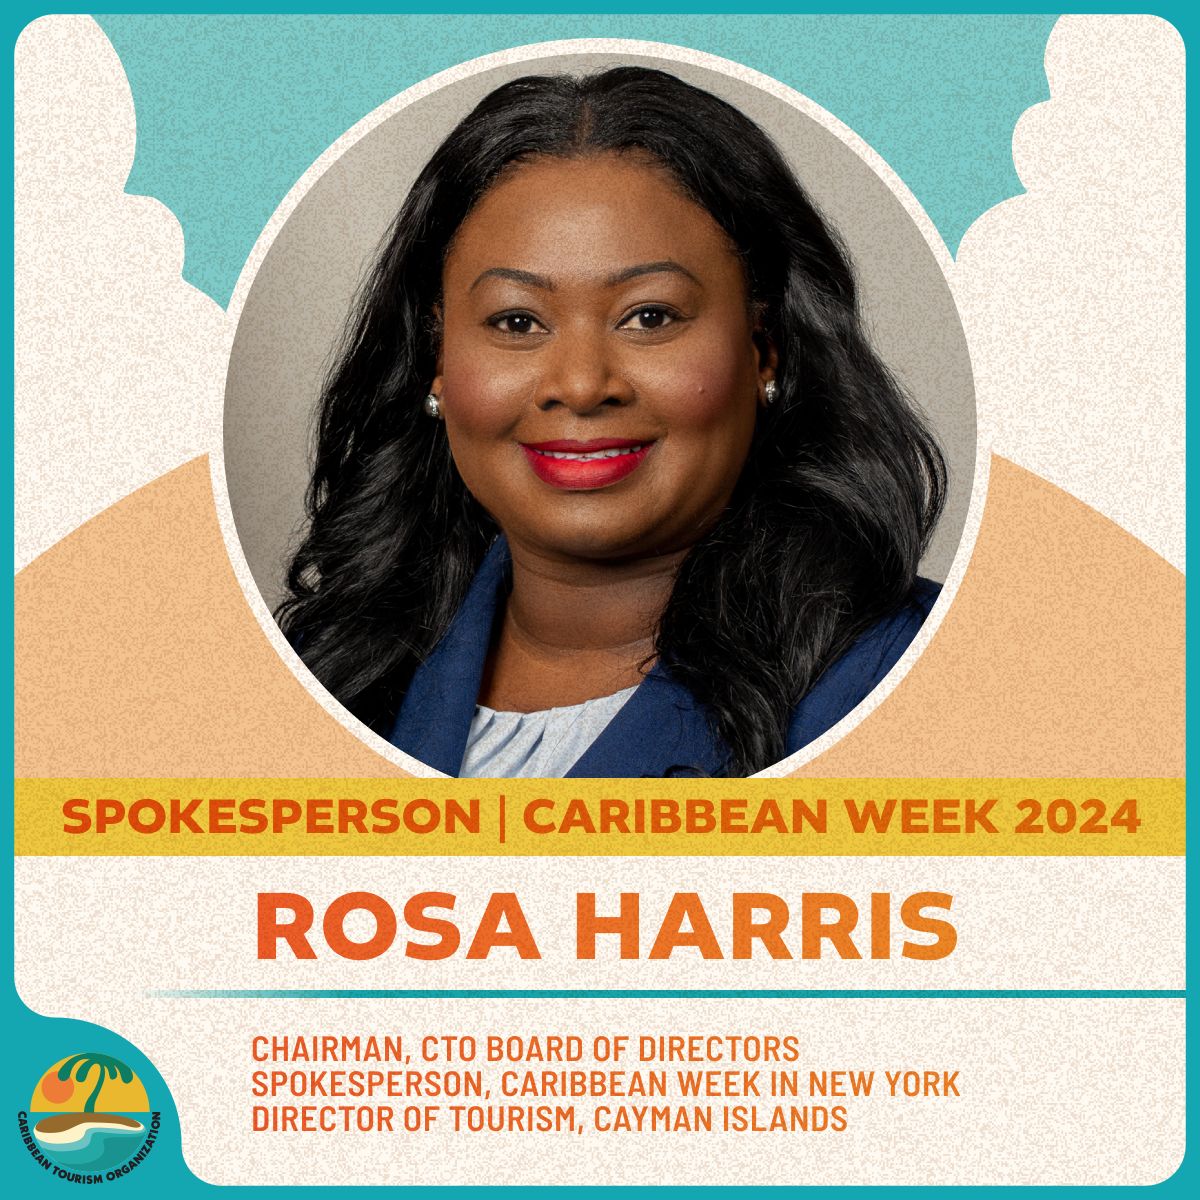 The CTO is excited to announce Rosa Harris, Chairman of our Board of Directors and @Cayman_Islands Director of Tourism, as the Spokesperson for the 2024 edition of Caribbean Week in New York. Join us for a week of enrichment, engagement and enjoyment. #CWNYC24 #CTO24